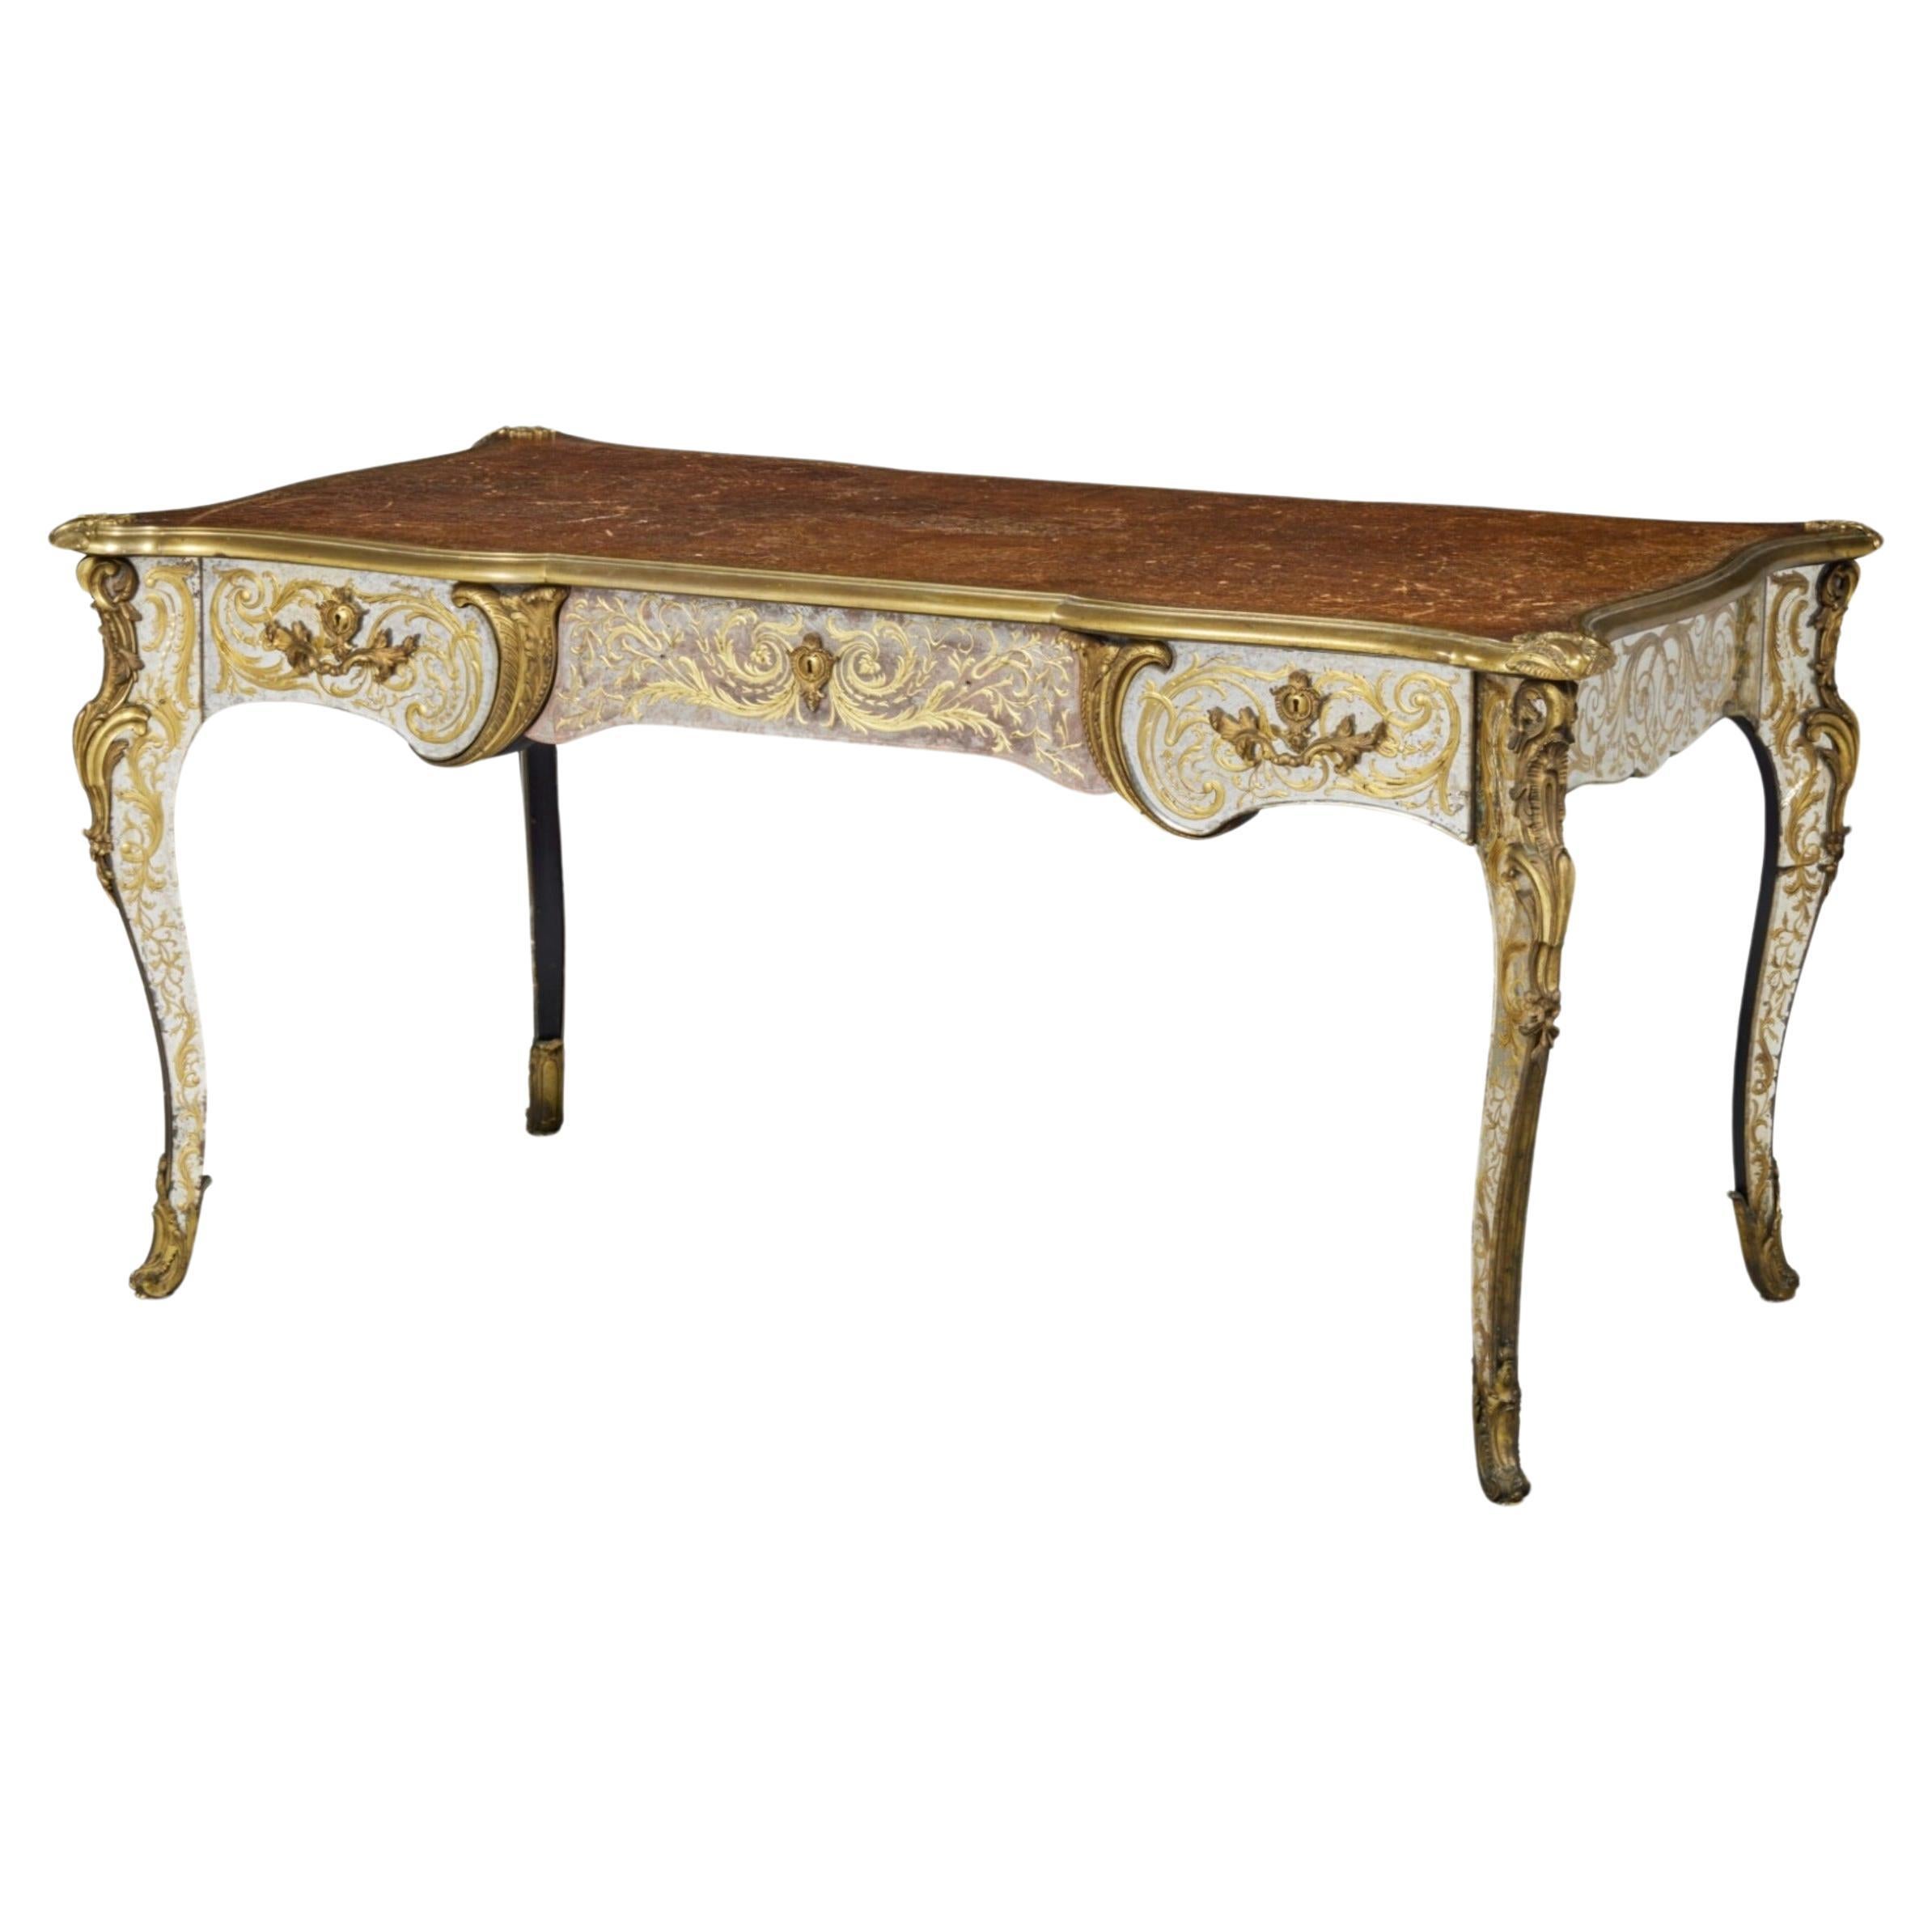 A Timeless Masterpiece: 

The Exquisite Bureau Plat of The Duke and Duchess of Windsor

In the world of fine art and antiques, certain pieces transcend time, becoming symbols of opulence and refined taste. One such masterpiece is the Louis XV Style